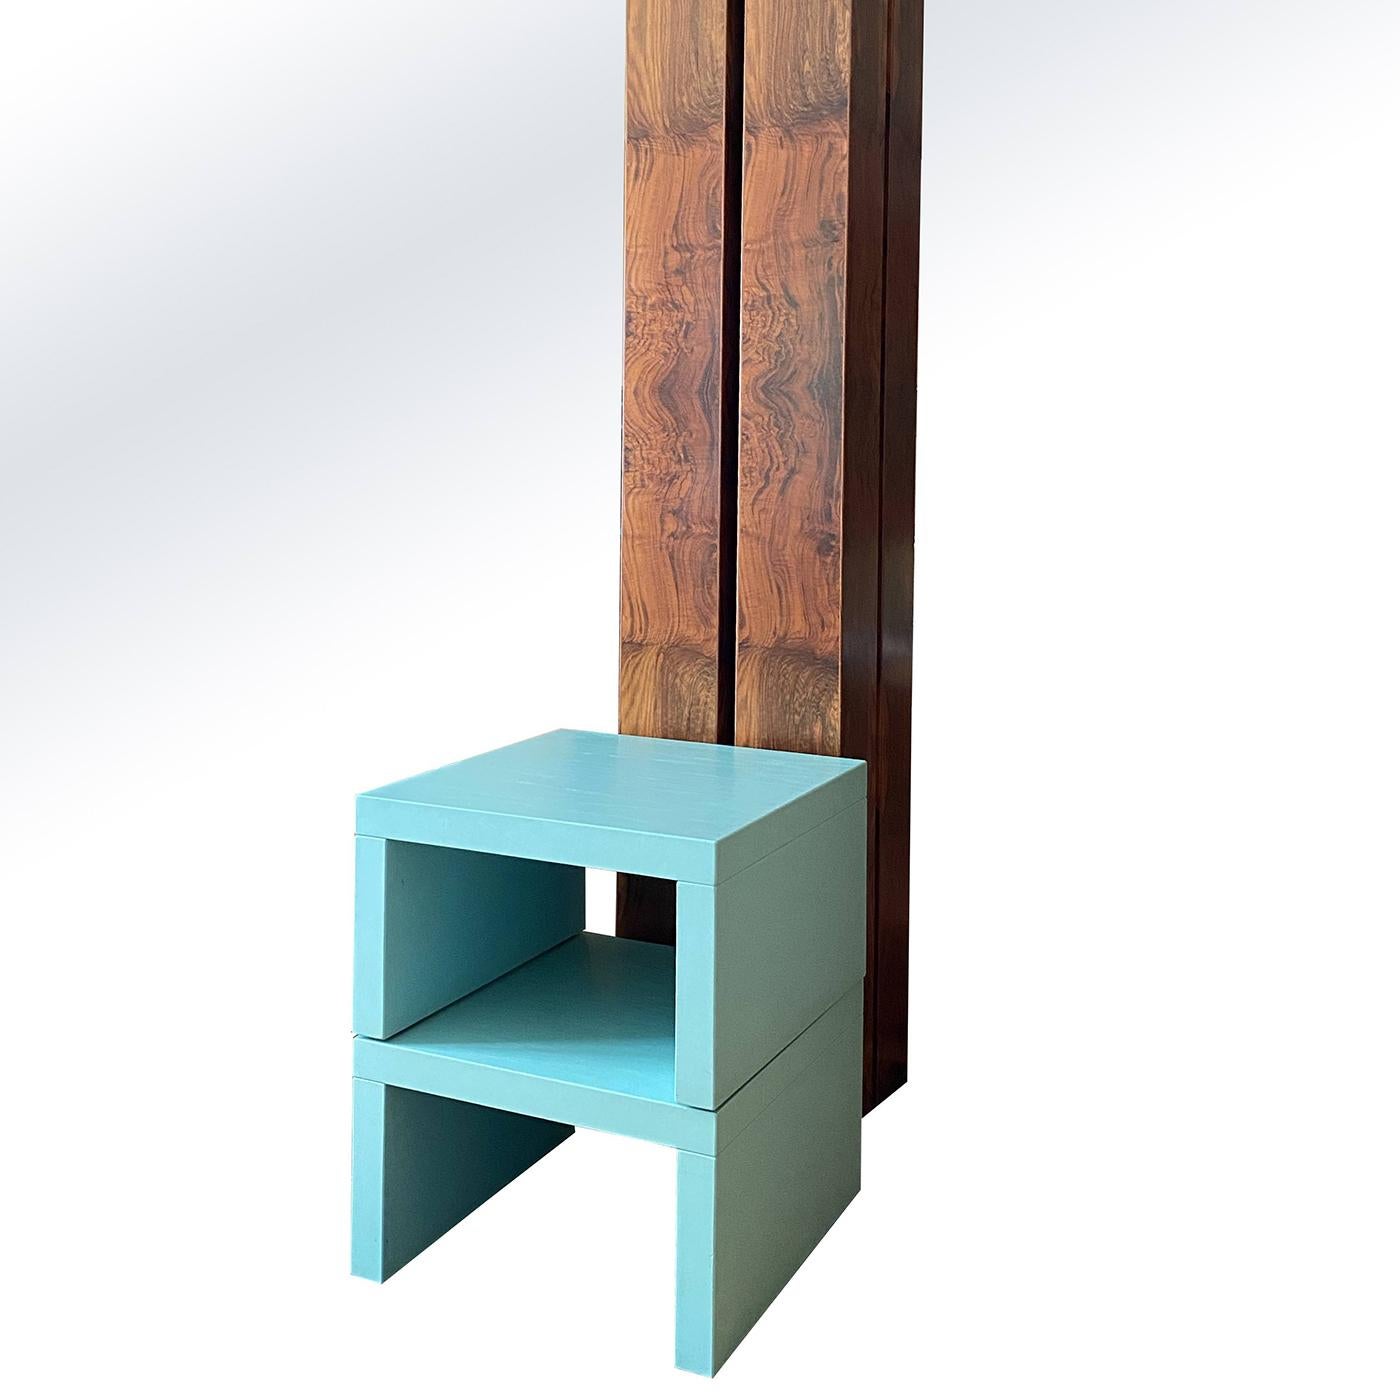 This decorative piece showcases the exceptional design of Ferdinando Meccani. The work comprises two tall columns crafted from solid walnut, boasting a rich combination of warm brown tones, paired with two small benches featuring a bright blue